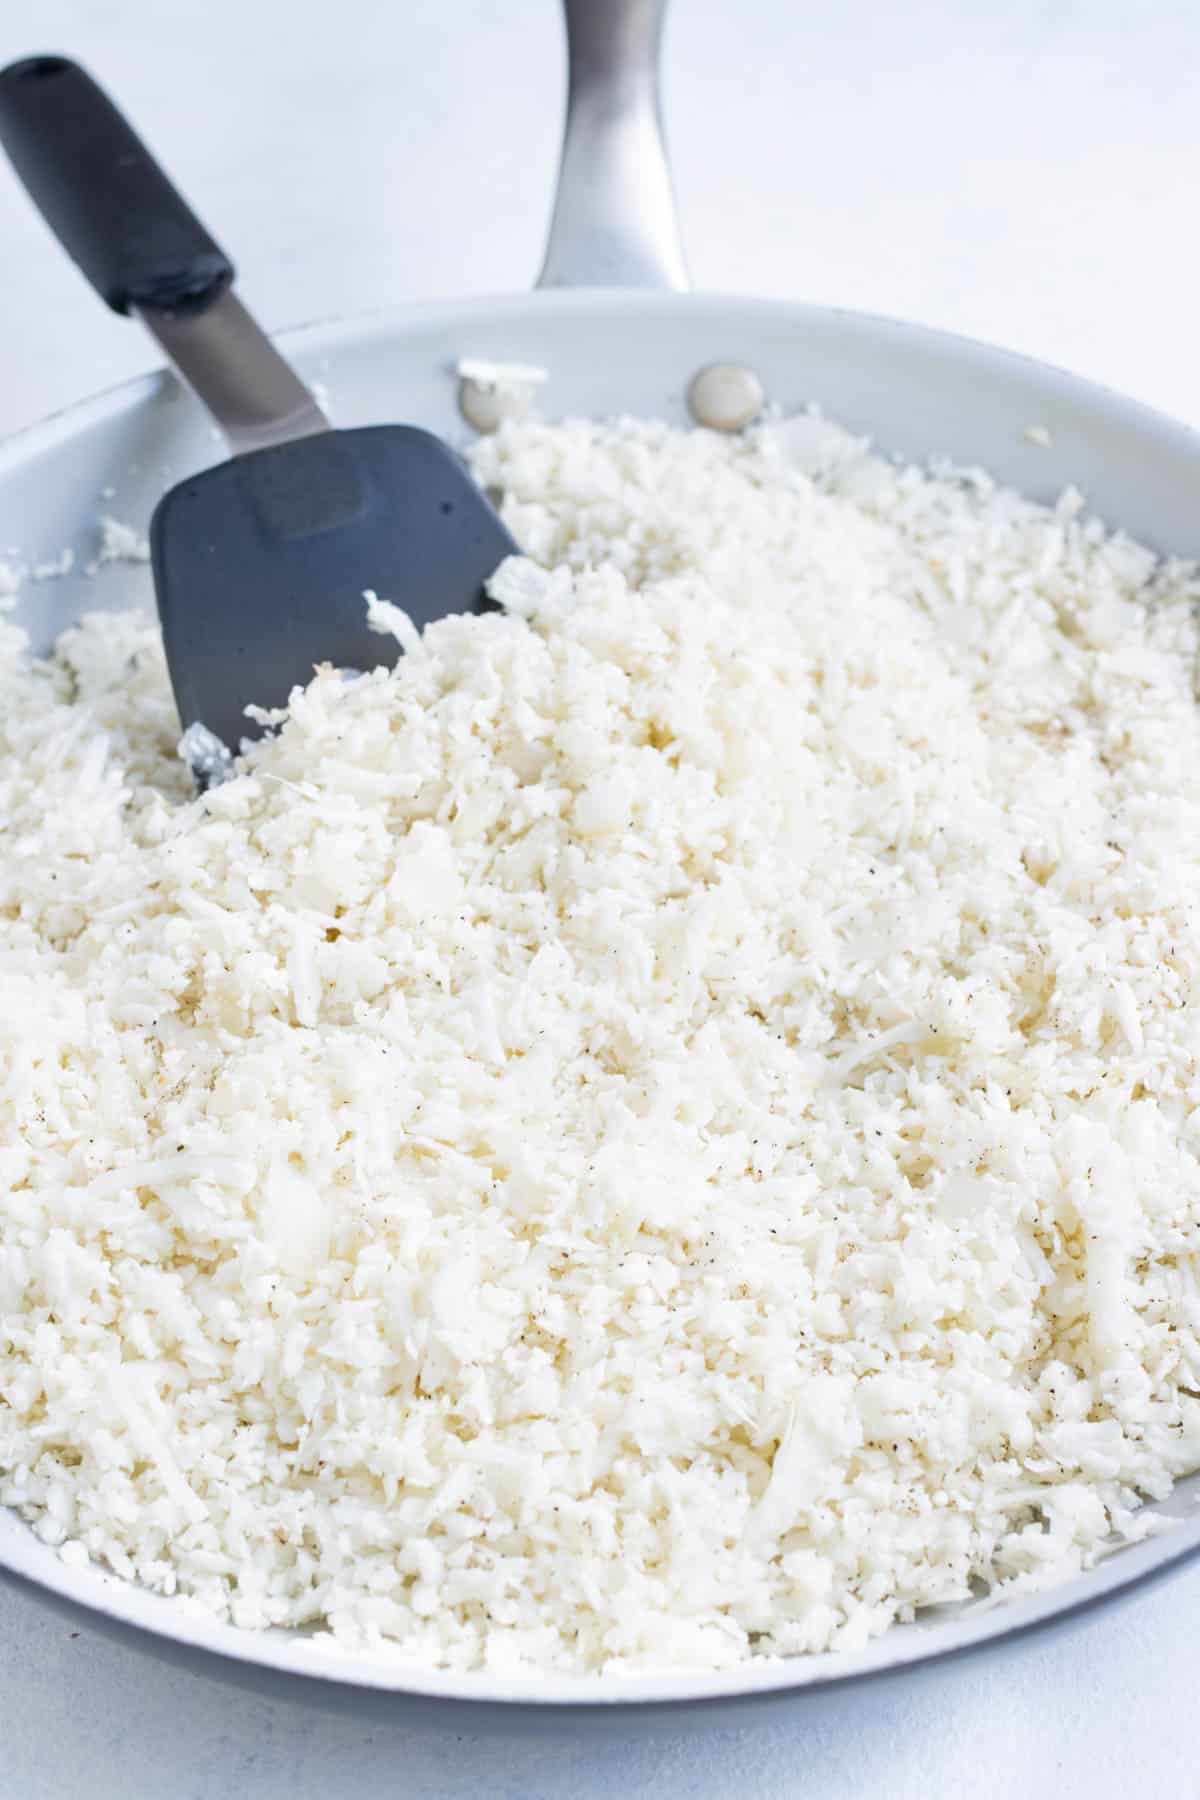 Riced cauliflower is added to the onion base.